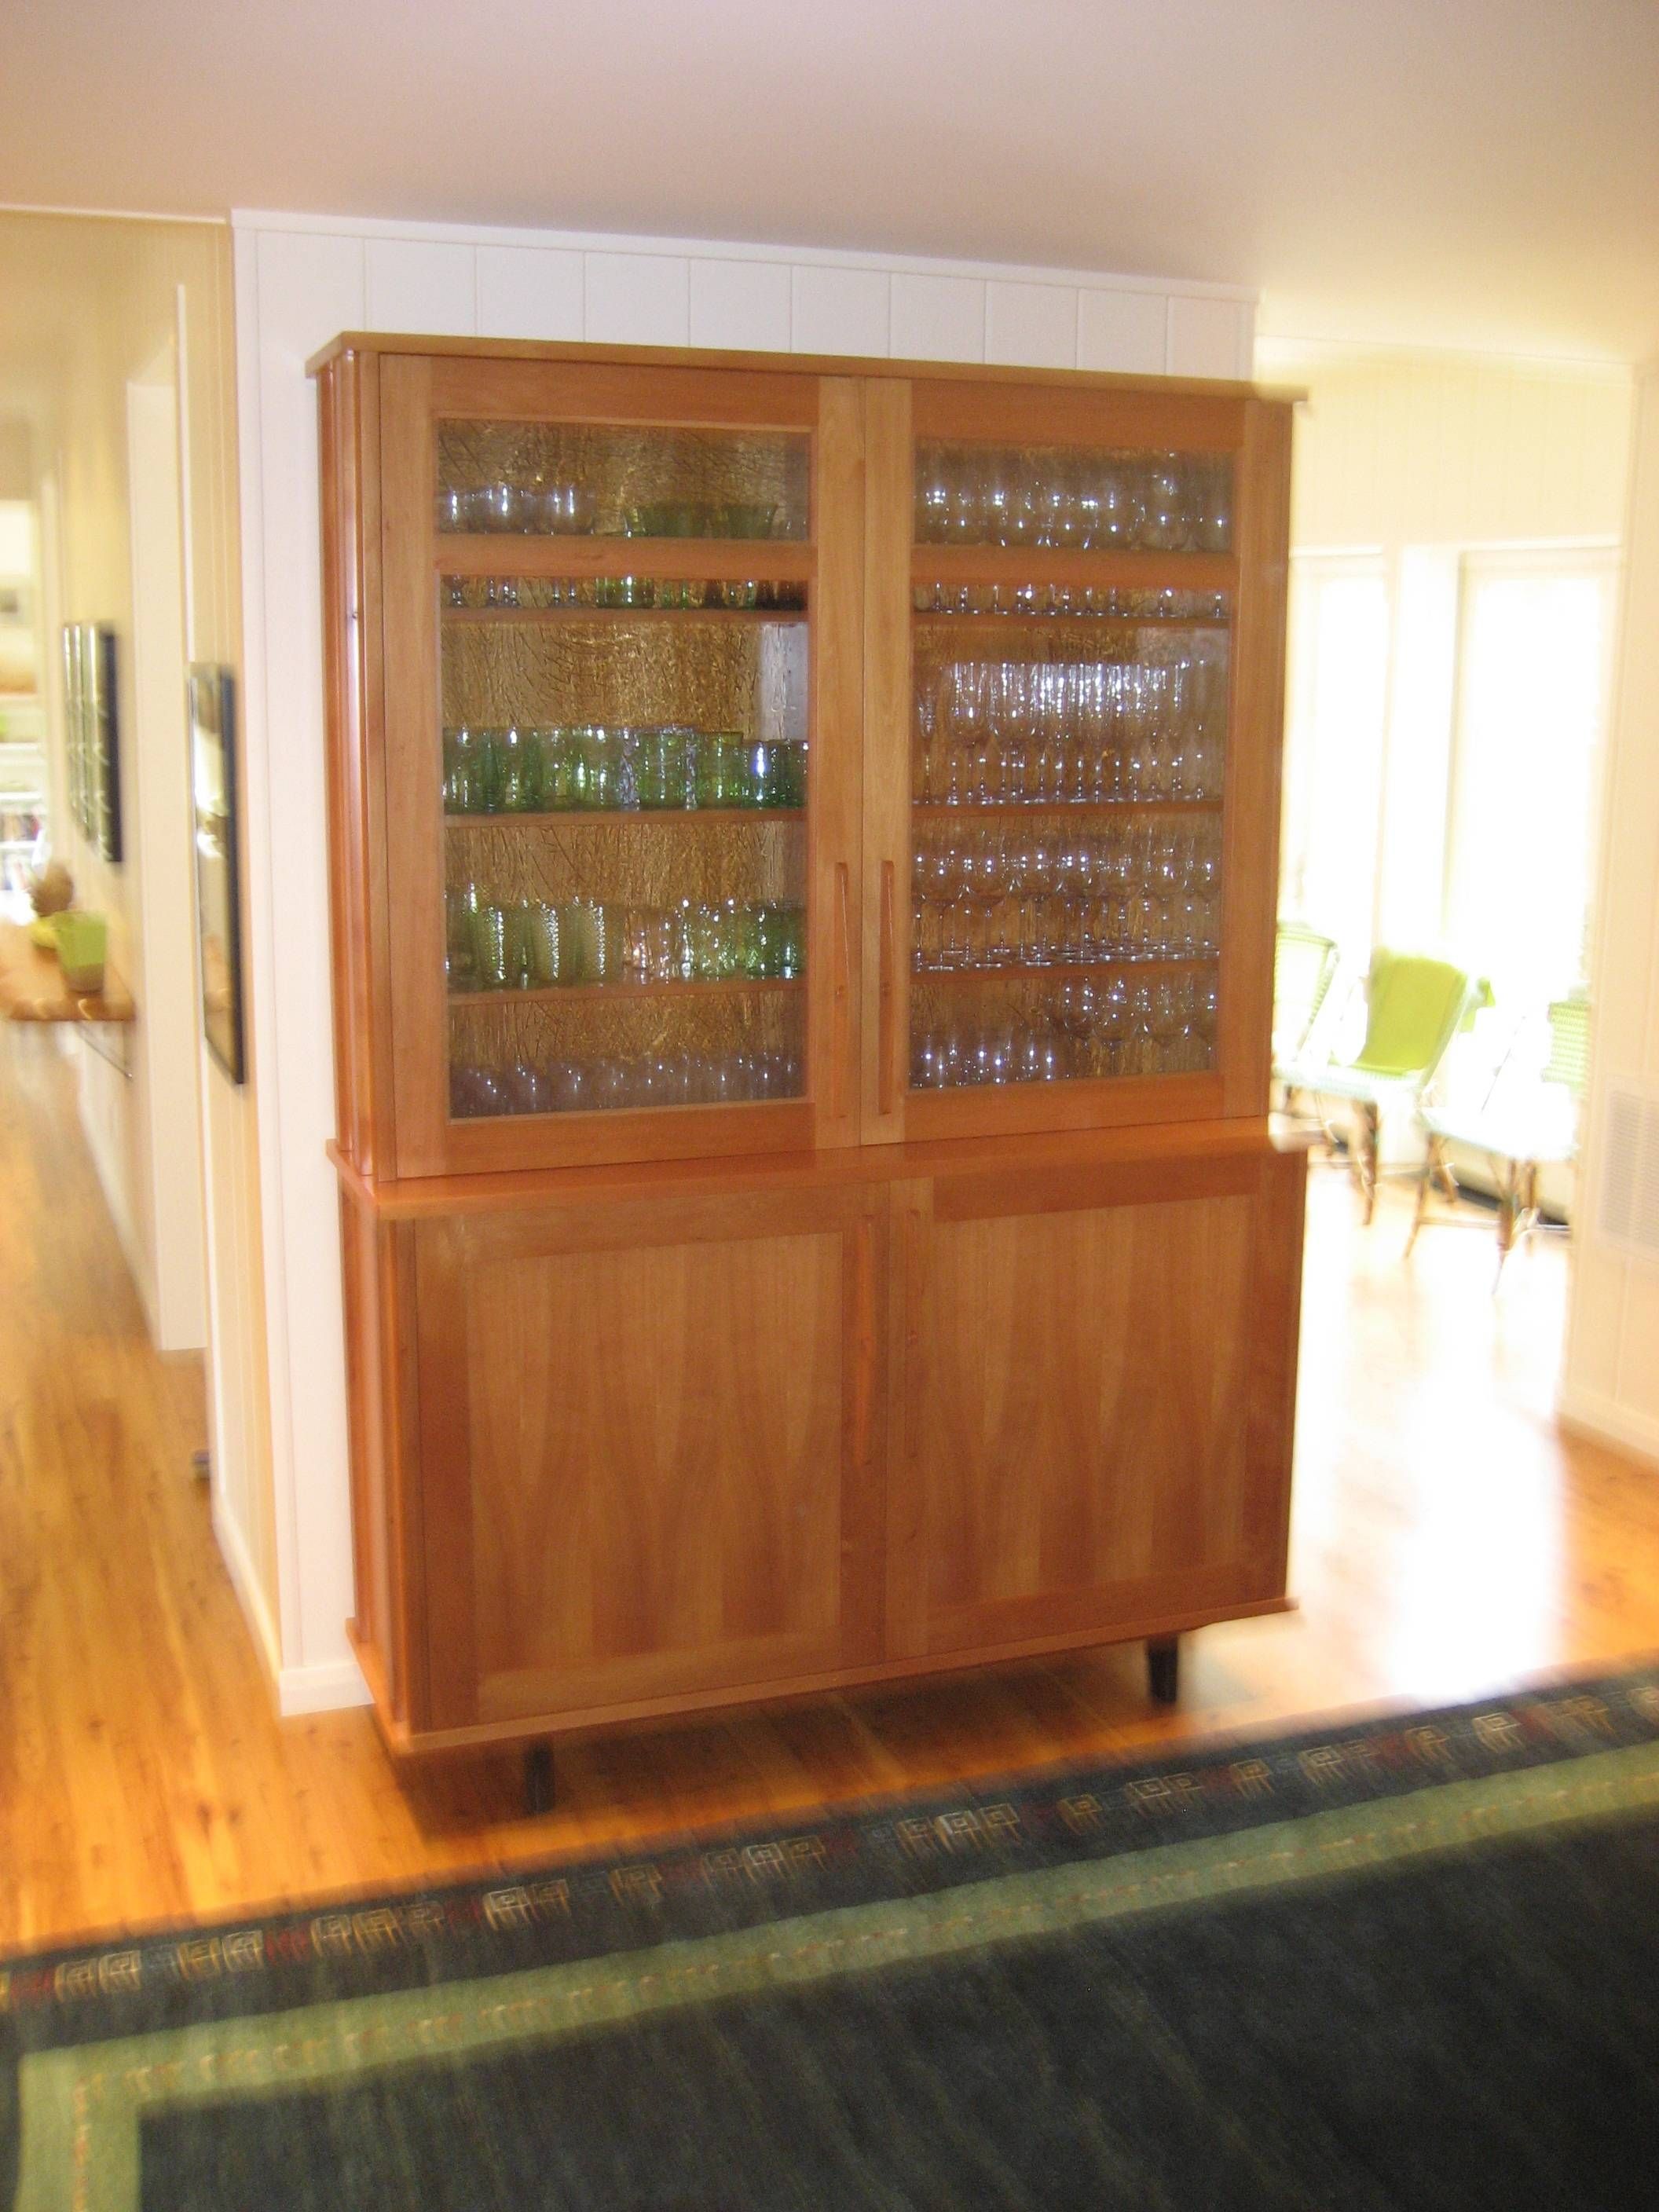 Tall Sideboard With Glass Doors | Wood Furniture, Cabinetry And With Regard To Tall Sideboard (View 8 of 20)